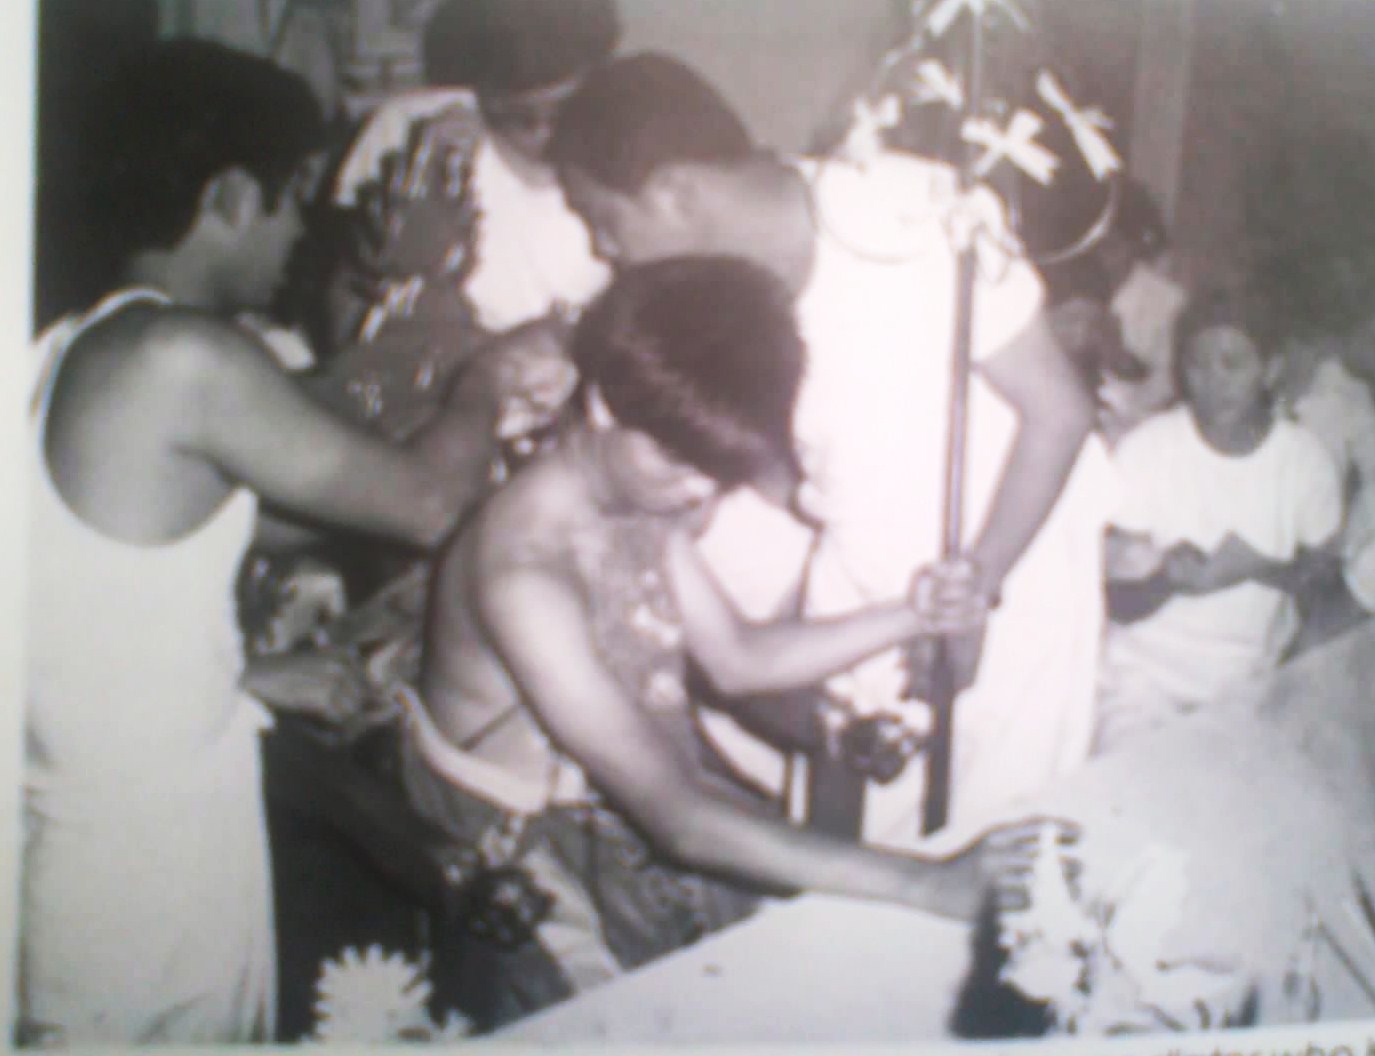 P. Philip in service of the lord saint 1969 to 1983